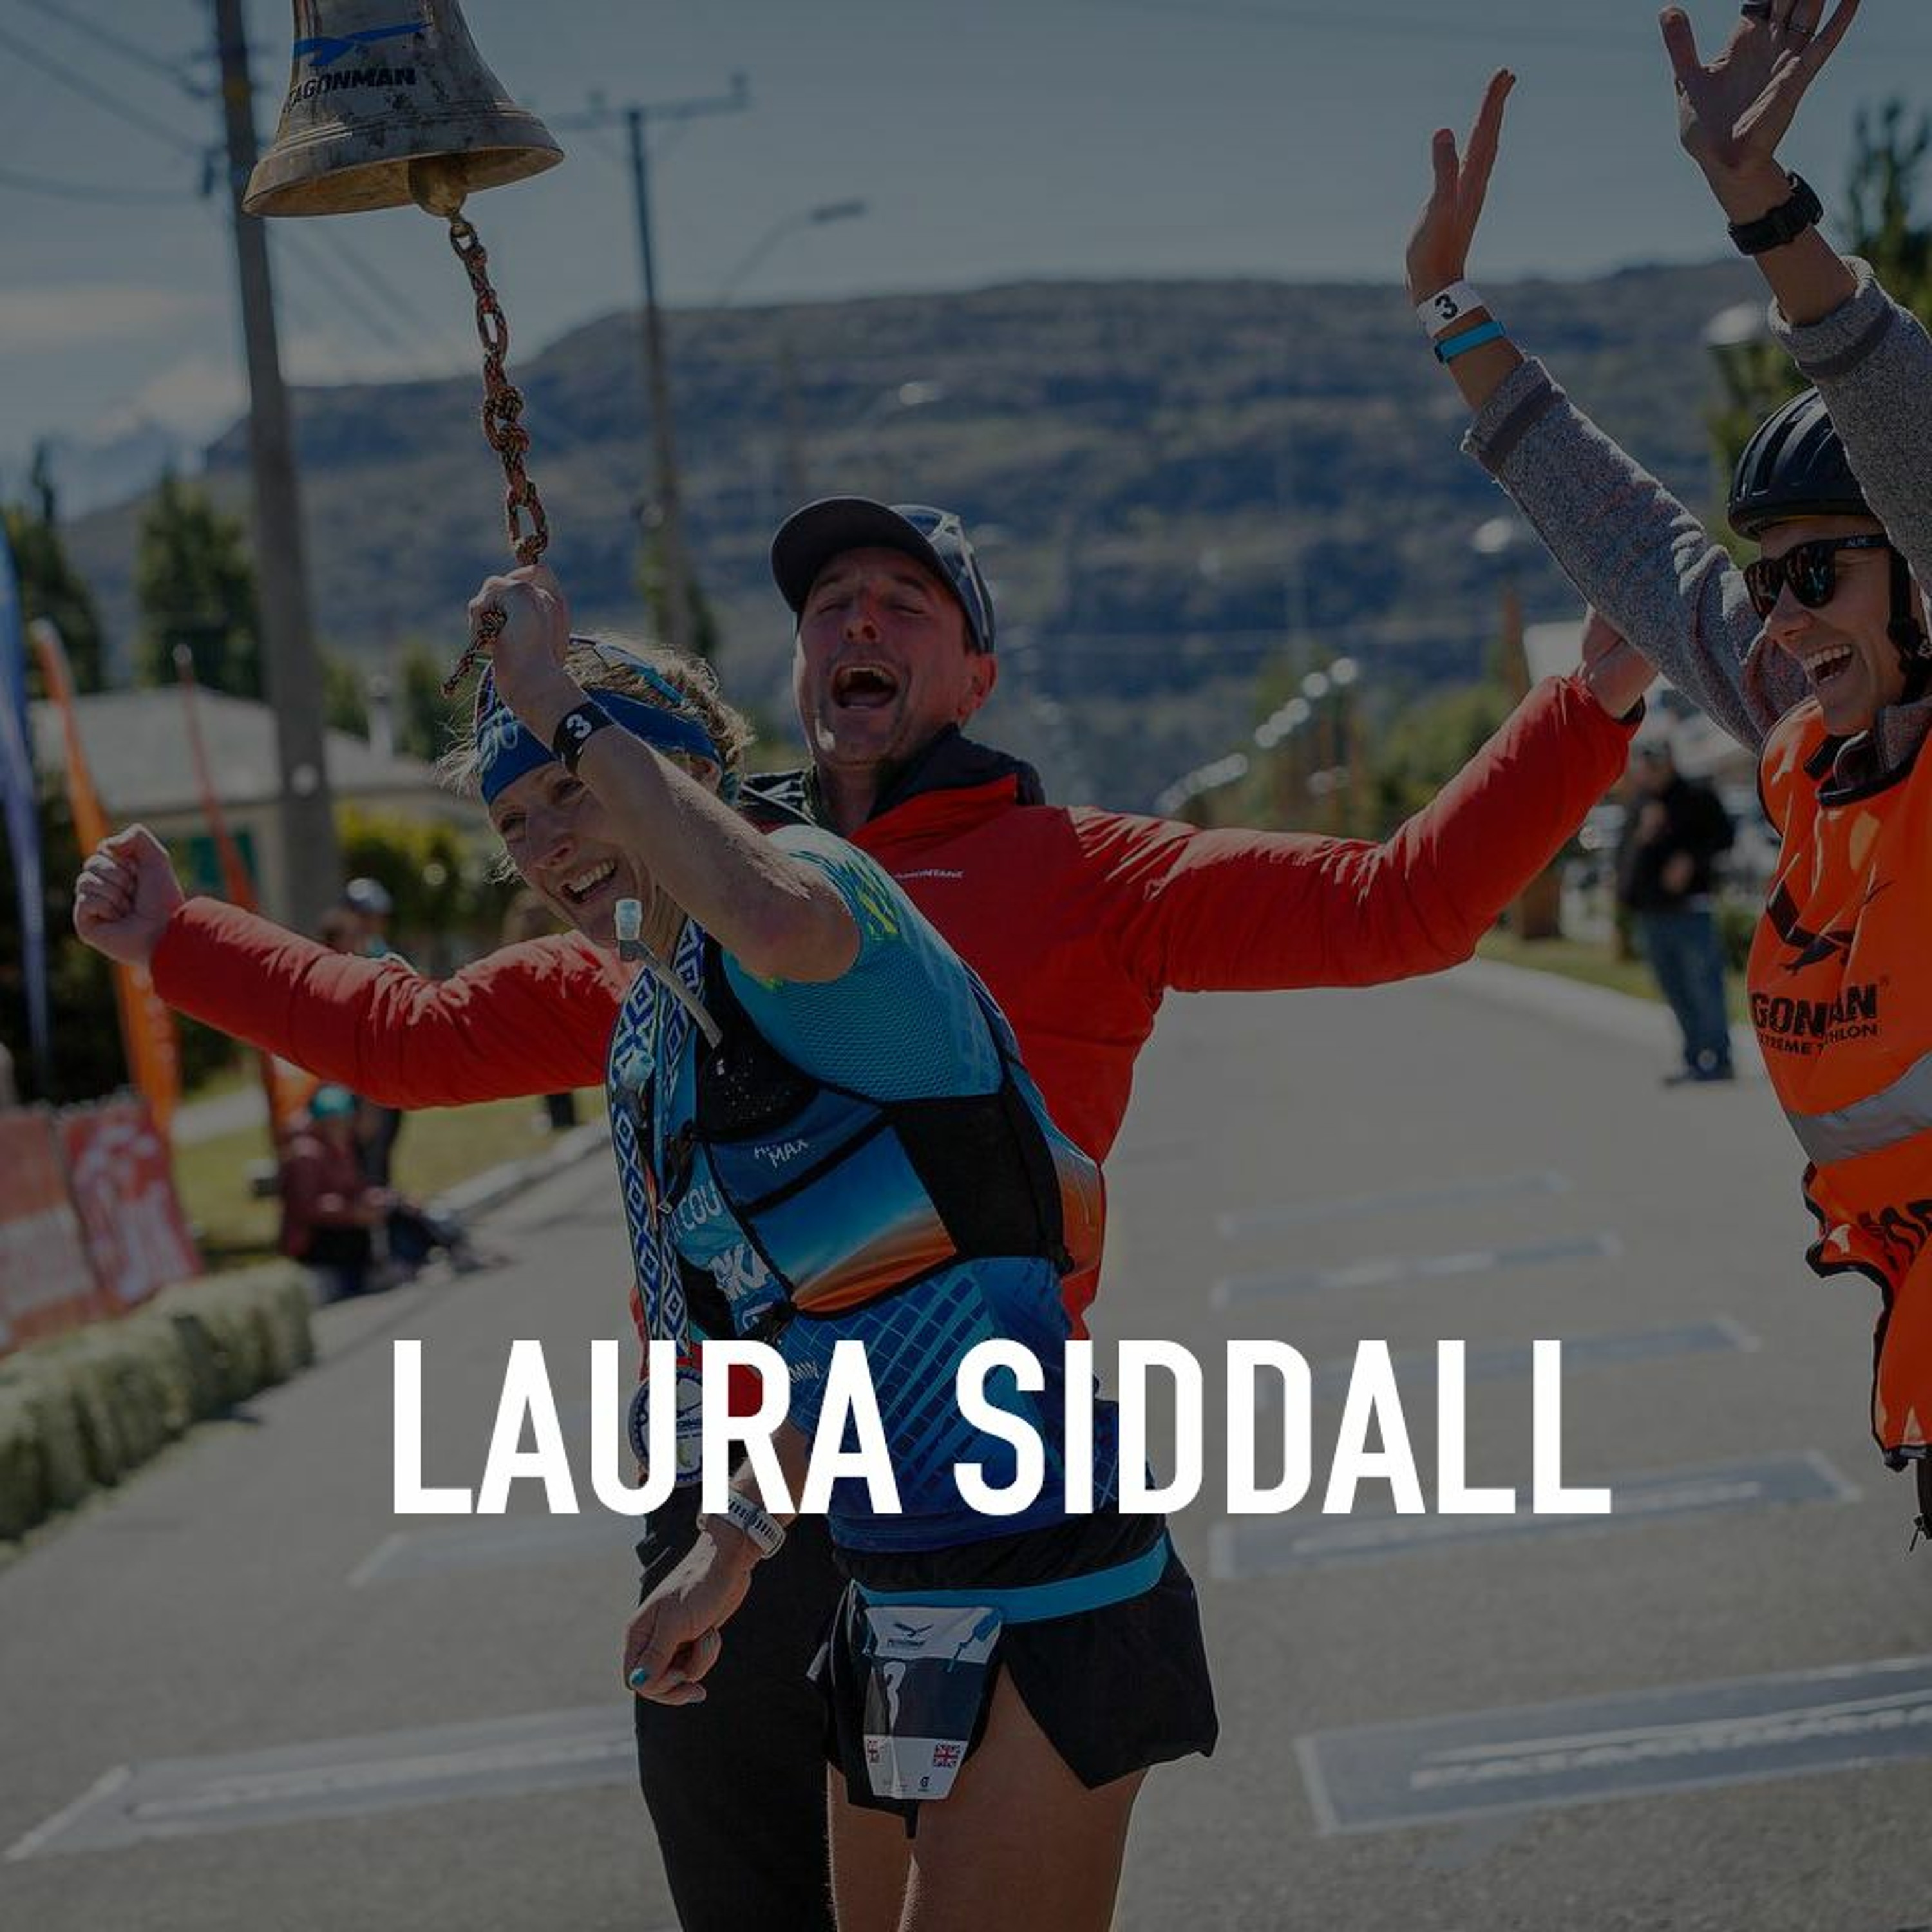 Professional Triathlete Laura Siddall - Ringing The Bell At The Bottom Of The Earth